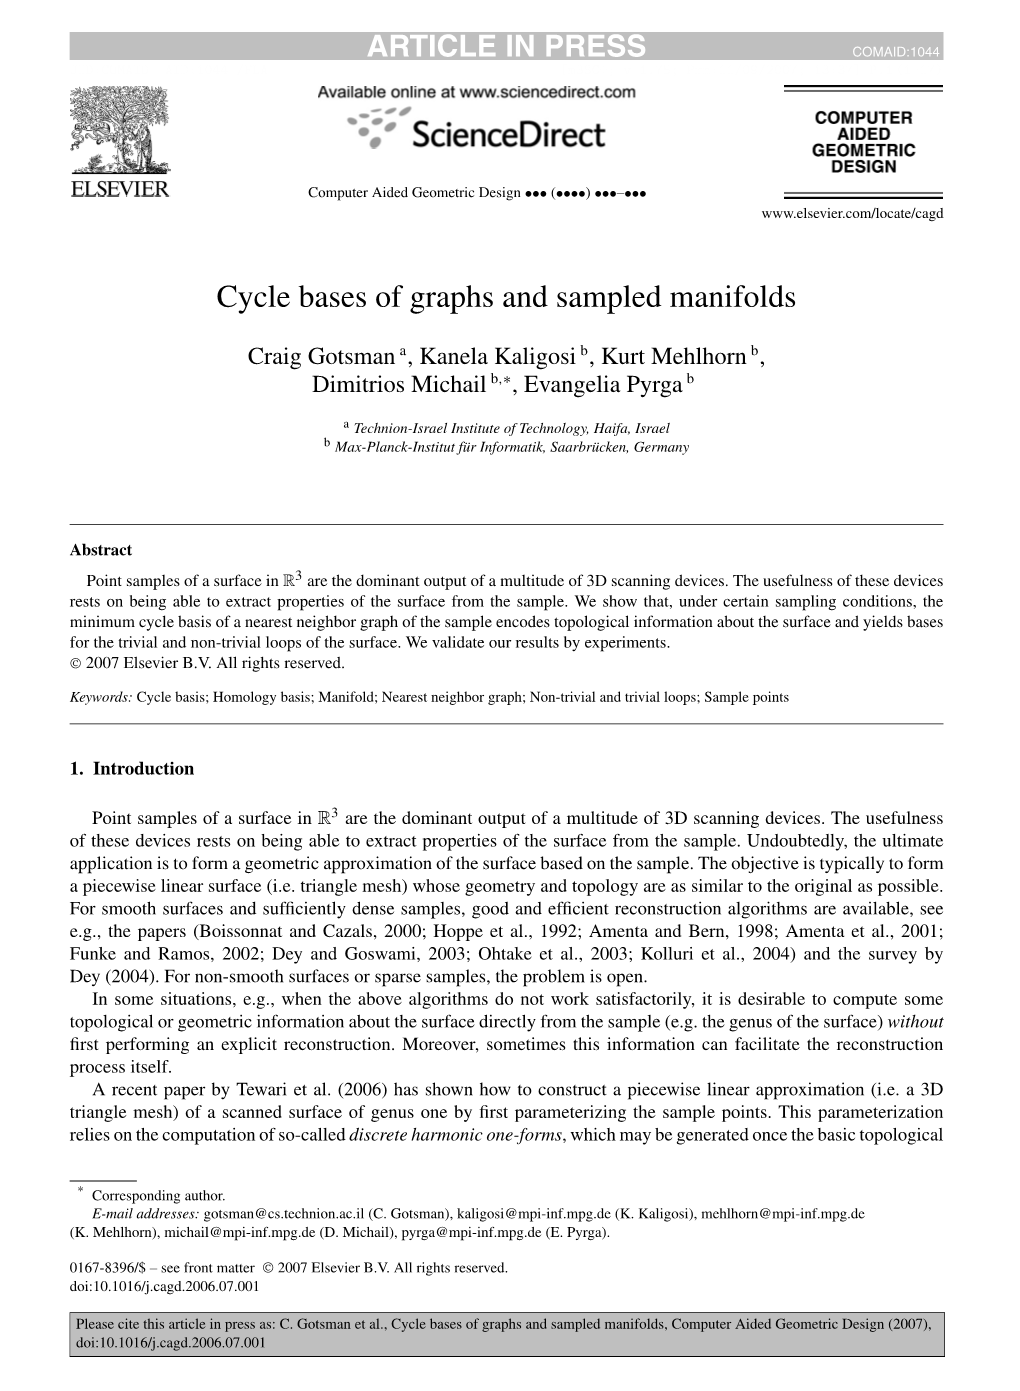 Cycle Bases of Graphs and Sampled Manifolds